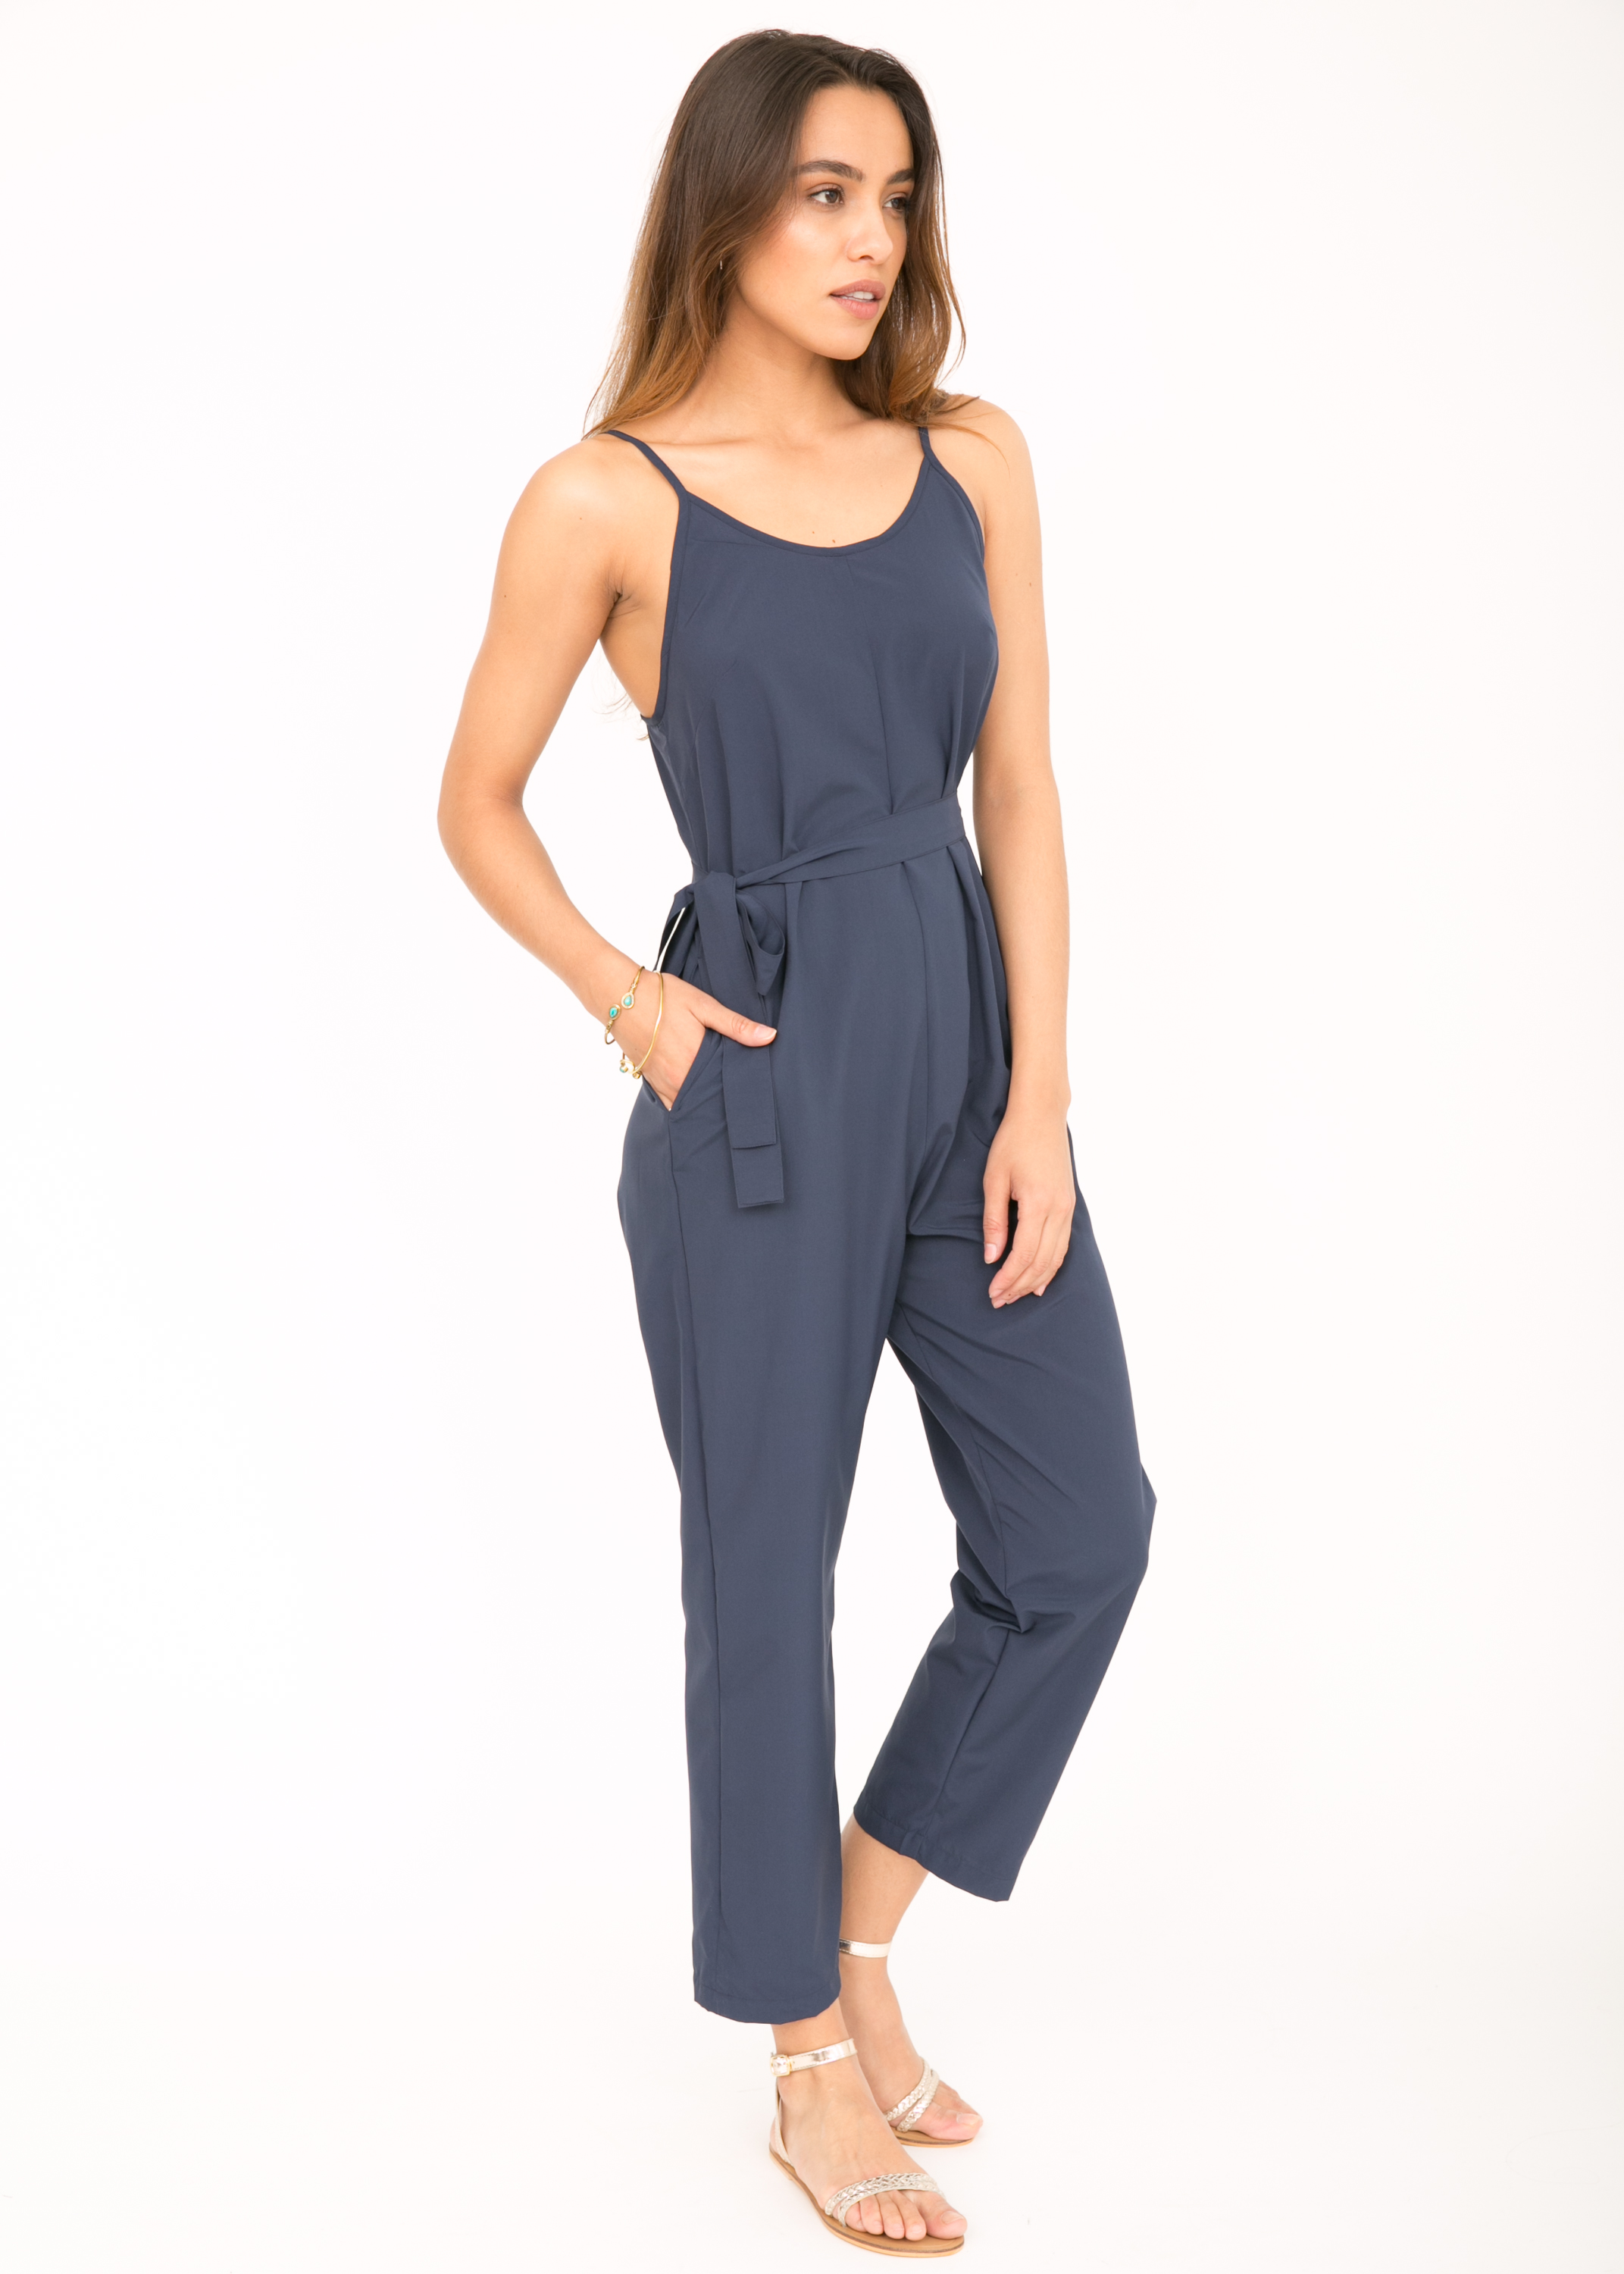 Relaxed Strappy Romper Jumpsuit Blue ...